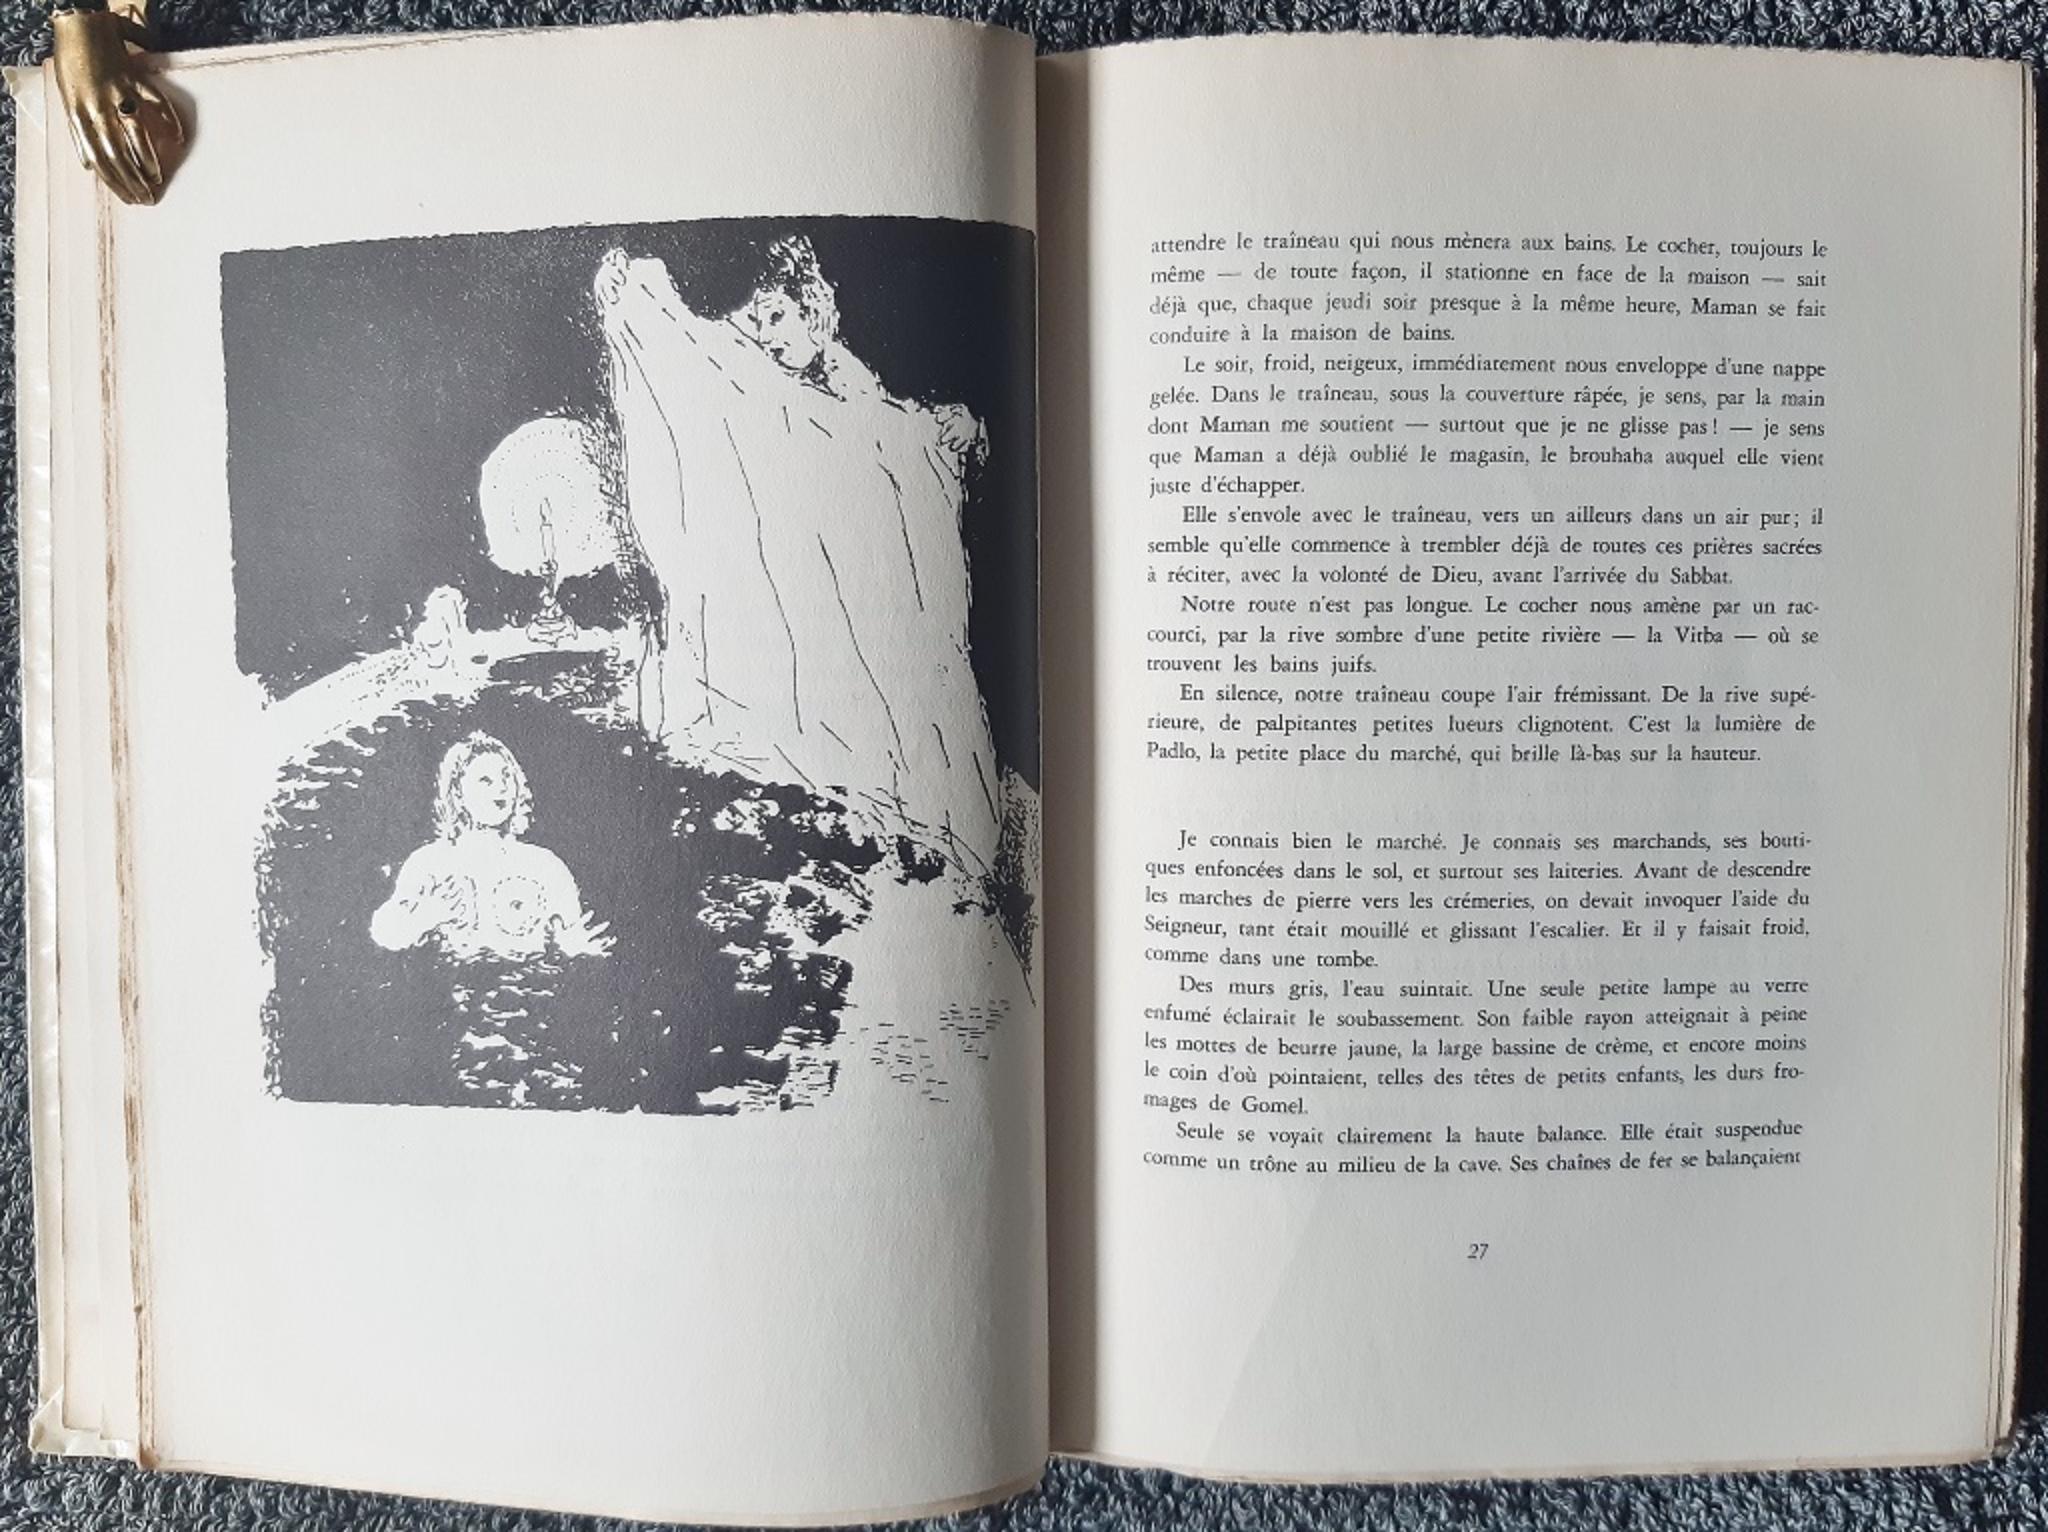 First edition of Chagall's autobiography.
Limited edition of 1650 specimens.
Format: In-8°
Pages: 253
32 reproductions of drawings of Chagall's youth.
Good conditions.